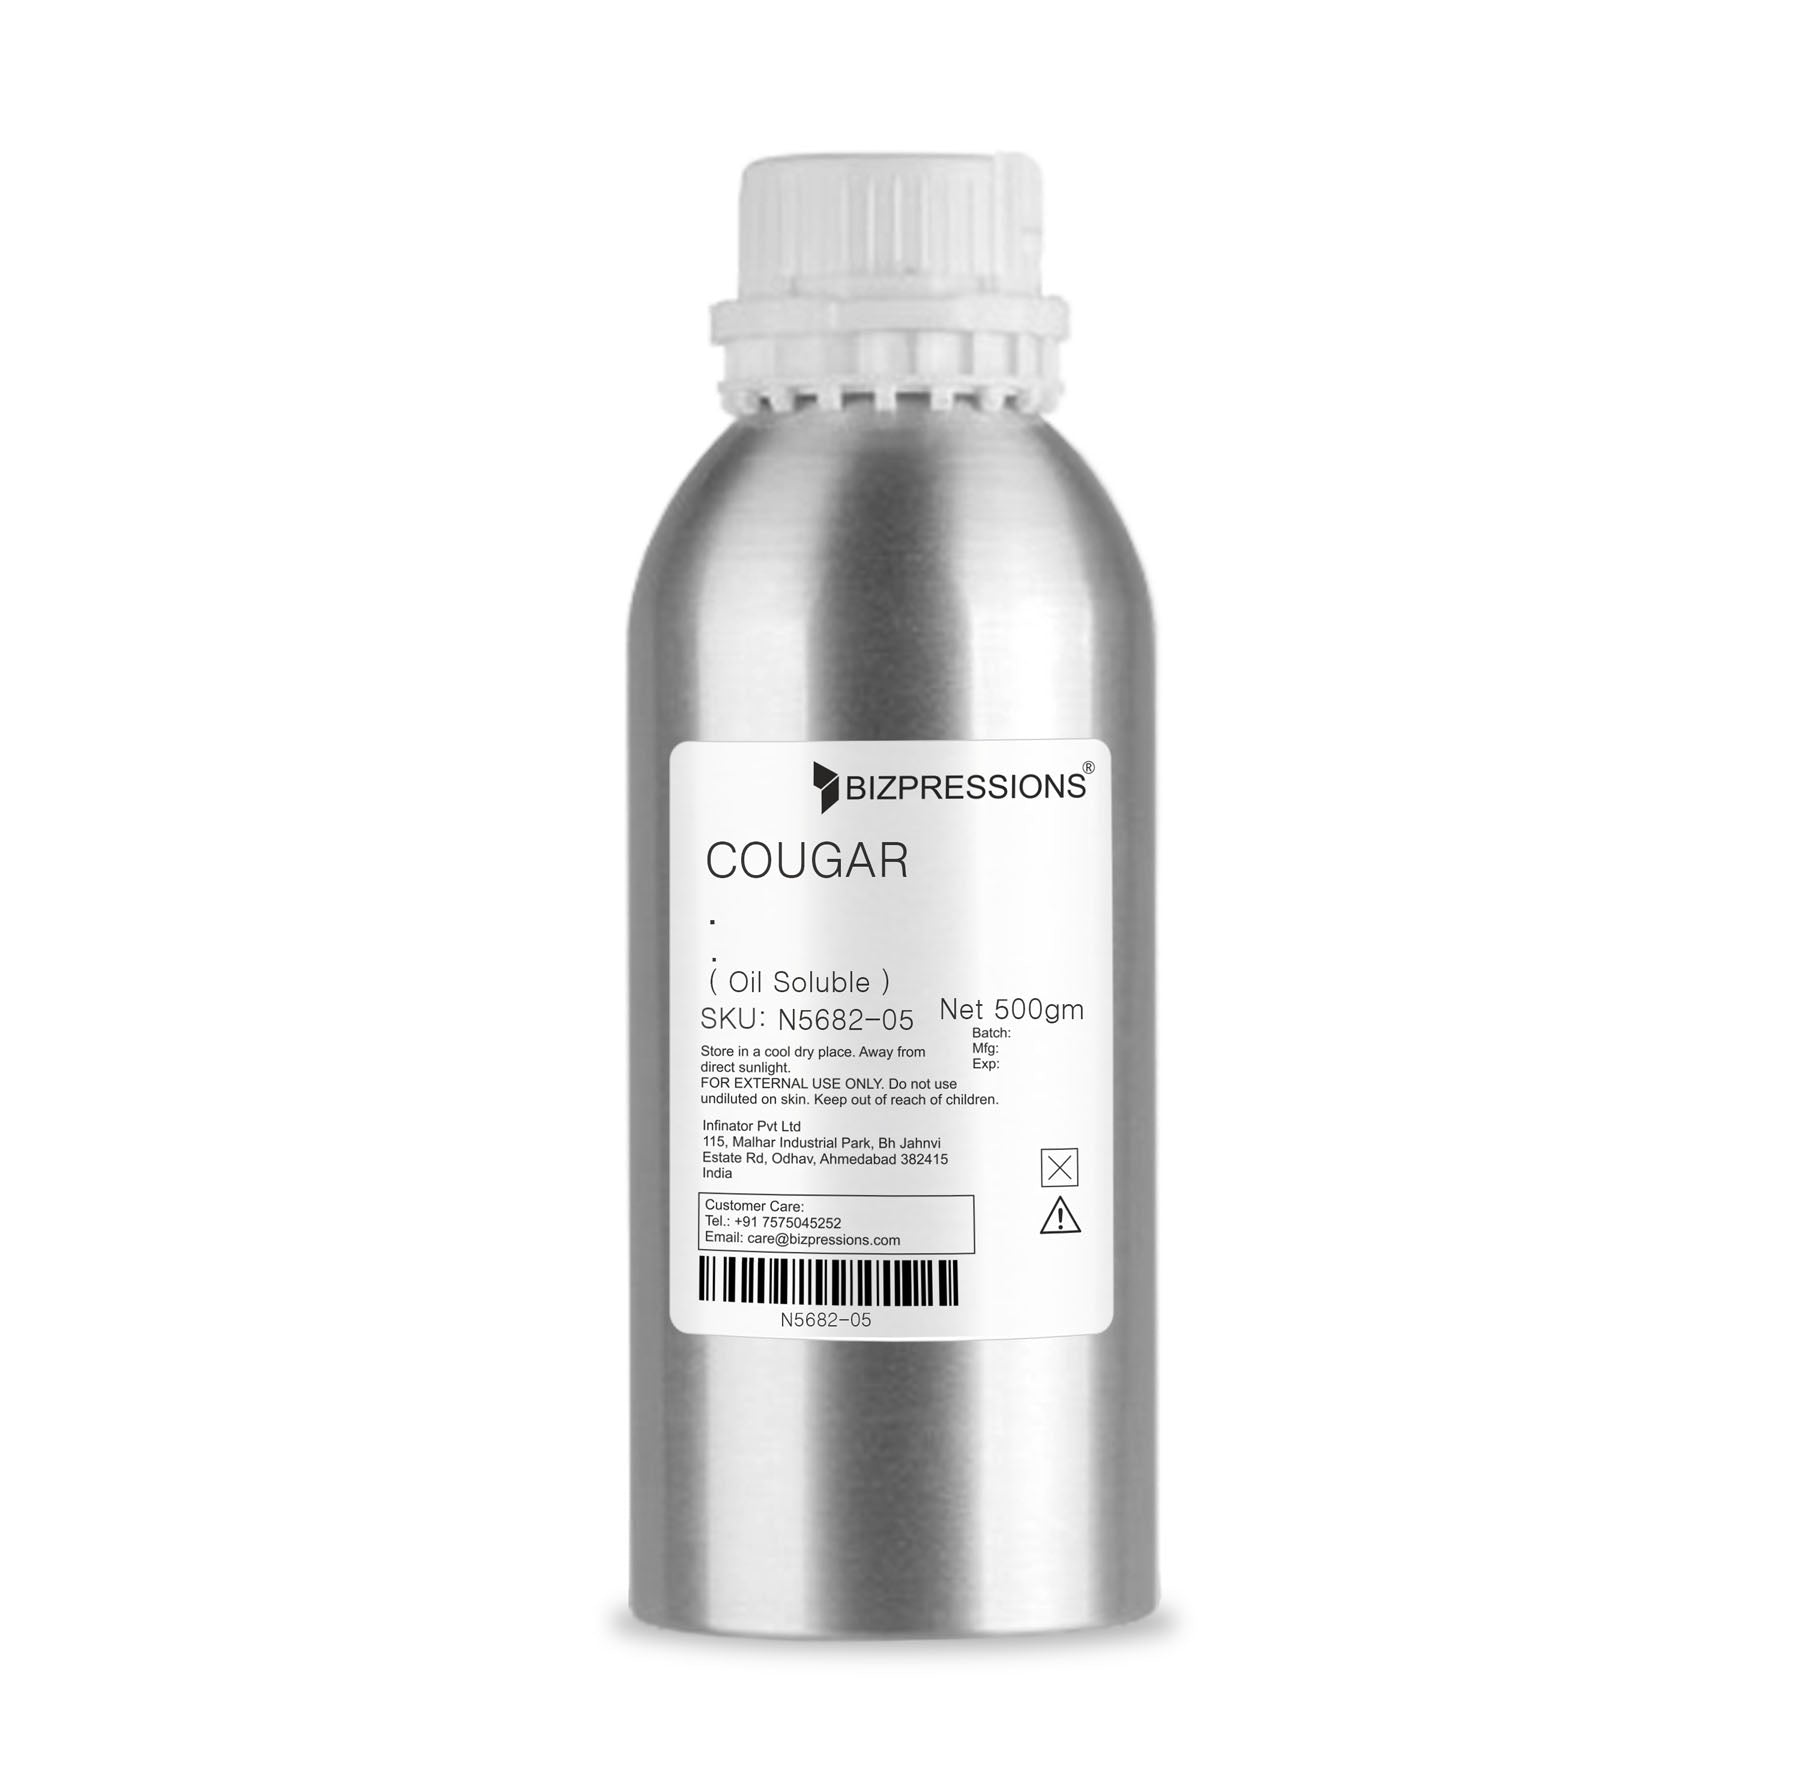 COUGAR - Fragrance ( Oil Soluble ) - 500 gm